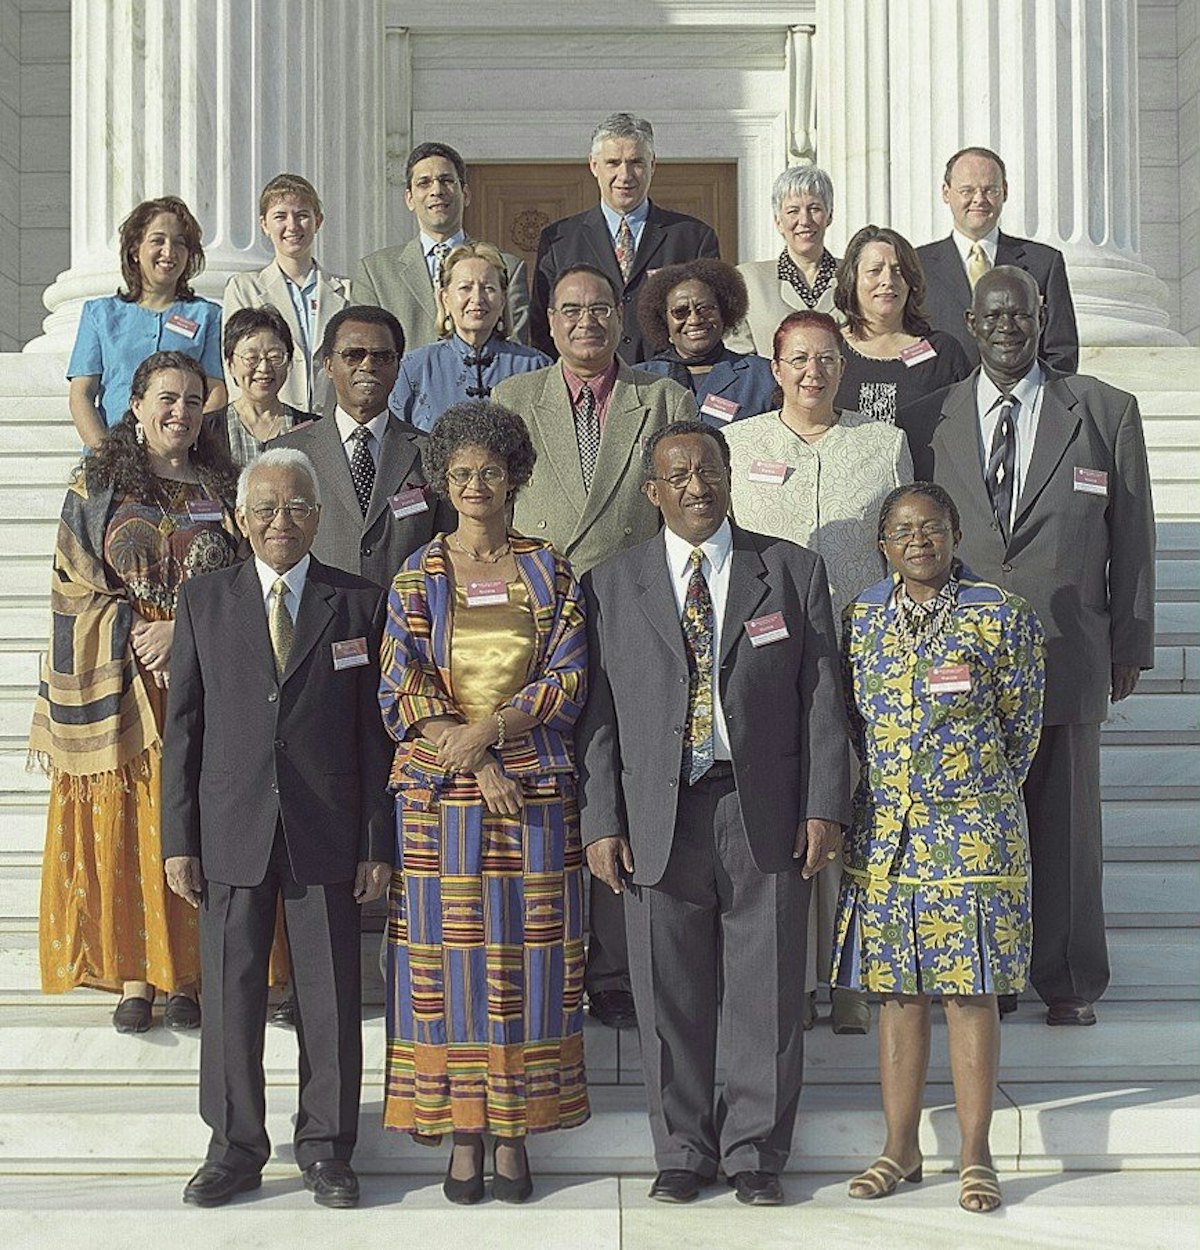 Nineteen tellers assembled at the Baha'i World Centre on Mount Carmel on 29 April 2003 to tally the votes in the election for the Universal House of Justice. The ballots were posted by members of the world's 178 National Spiritual Assemblies.| The tellers came from Africa (Ethiopia, Ghana, Kenya, South Africa), the Americas (Bahamas, Canada, Colombia, United States), Europe (Austria, Greece, Hungary, Turkey, United Kingdom), Asia (two from India, Japan); Australia and Oceania (Australia, Papua New Guinea, Marshall Islands).